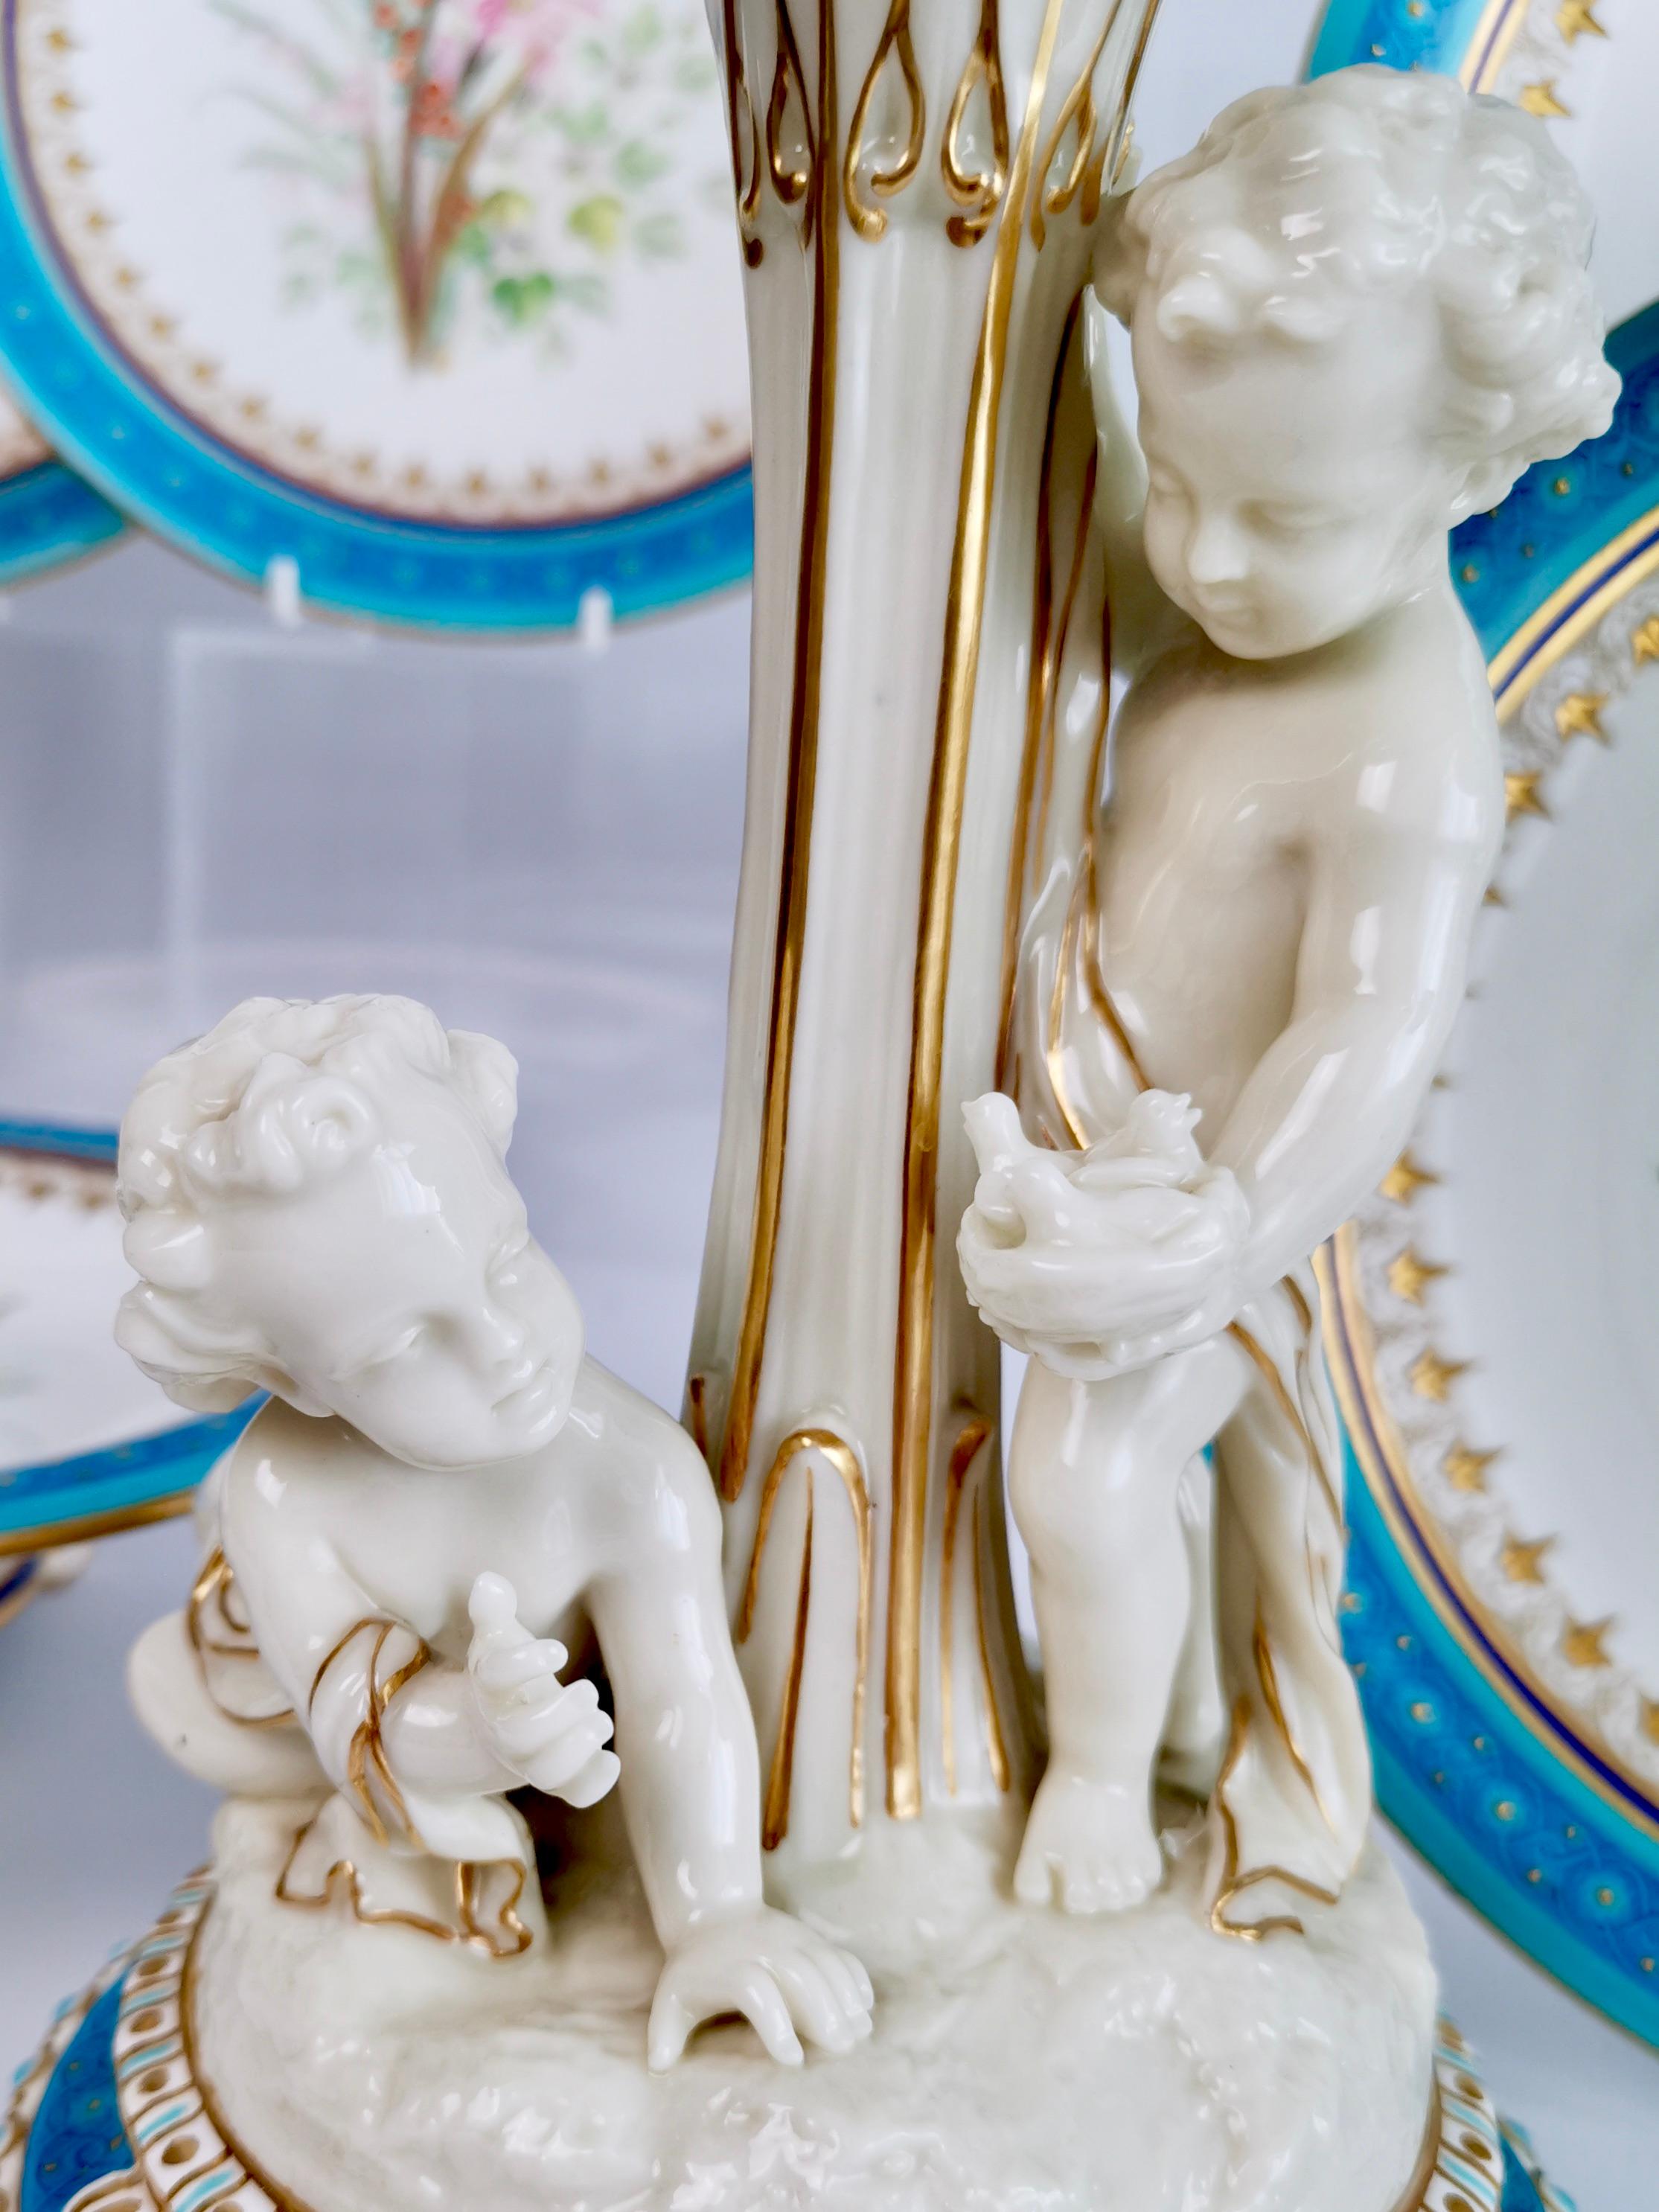 Hand-Painted Royal Worcester Porcelain Dessert Service, Turquoise with Parian Cherubs, 1910